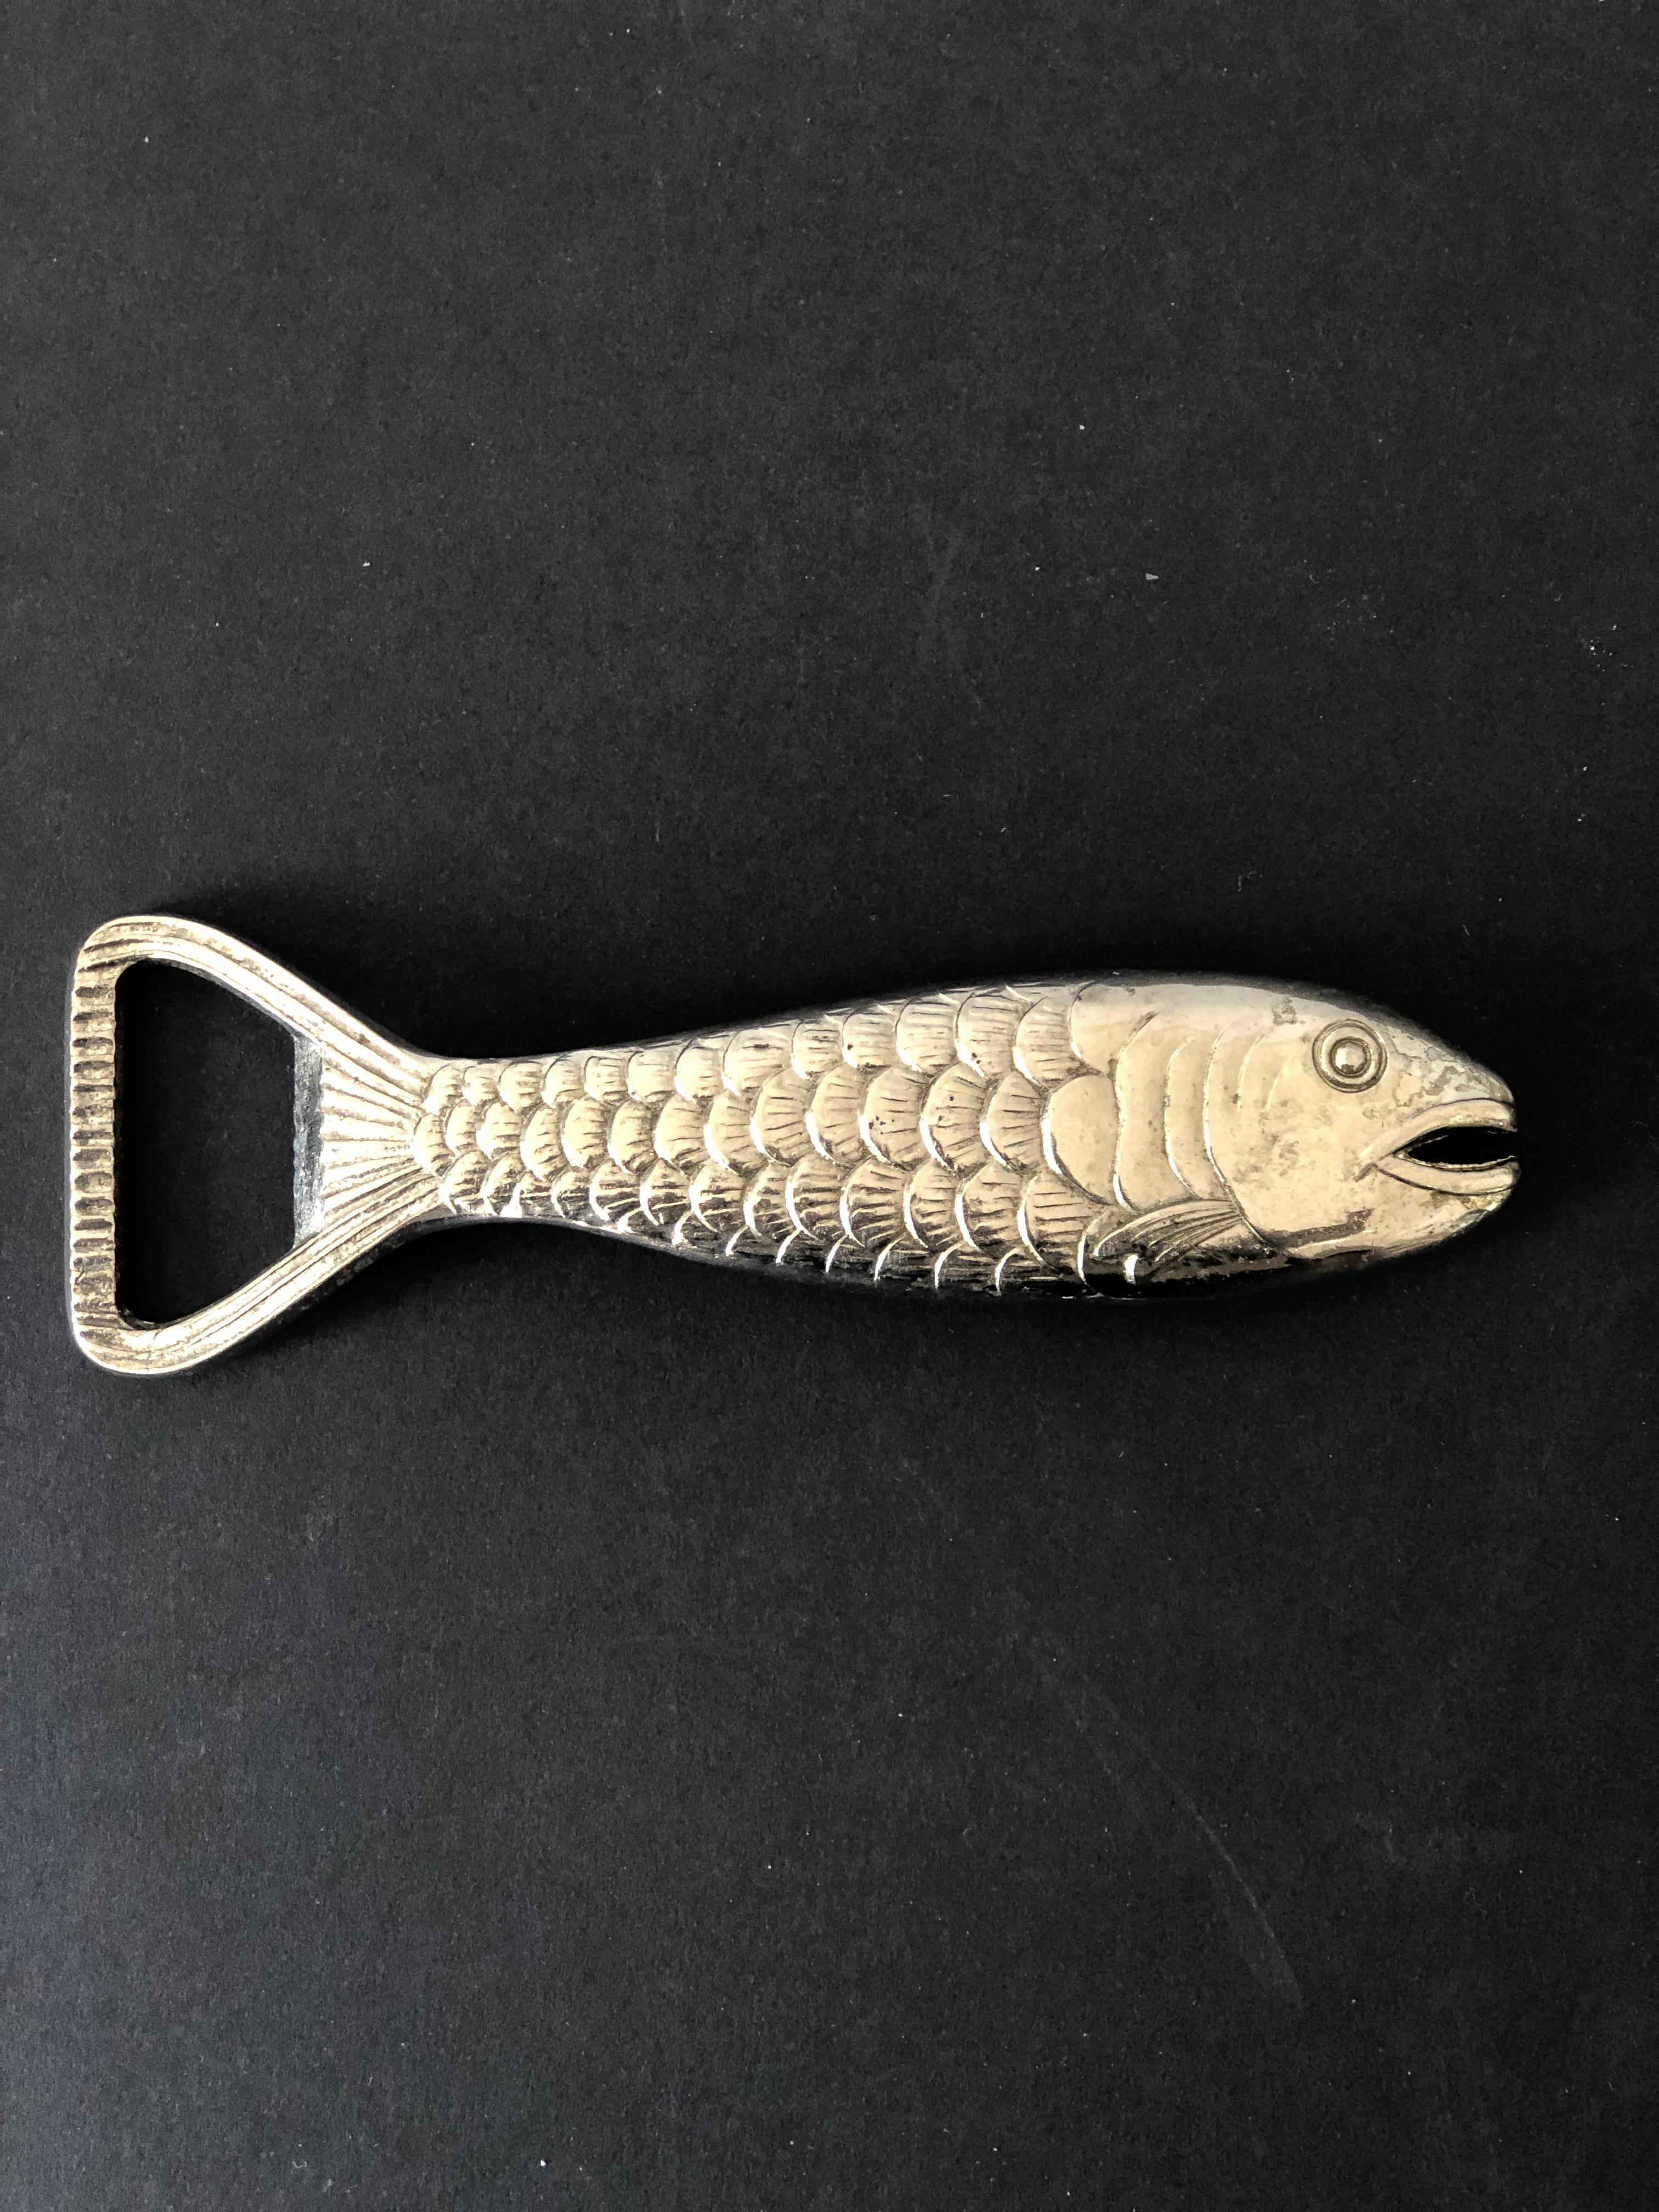 Very rare 1950s Classic Fish Bottle Opener Mid-Century Modern. 
Vintage silver plated opener by Firma Svenskt Tenn, Sweden. In catalogue 1950.